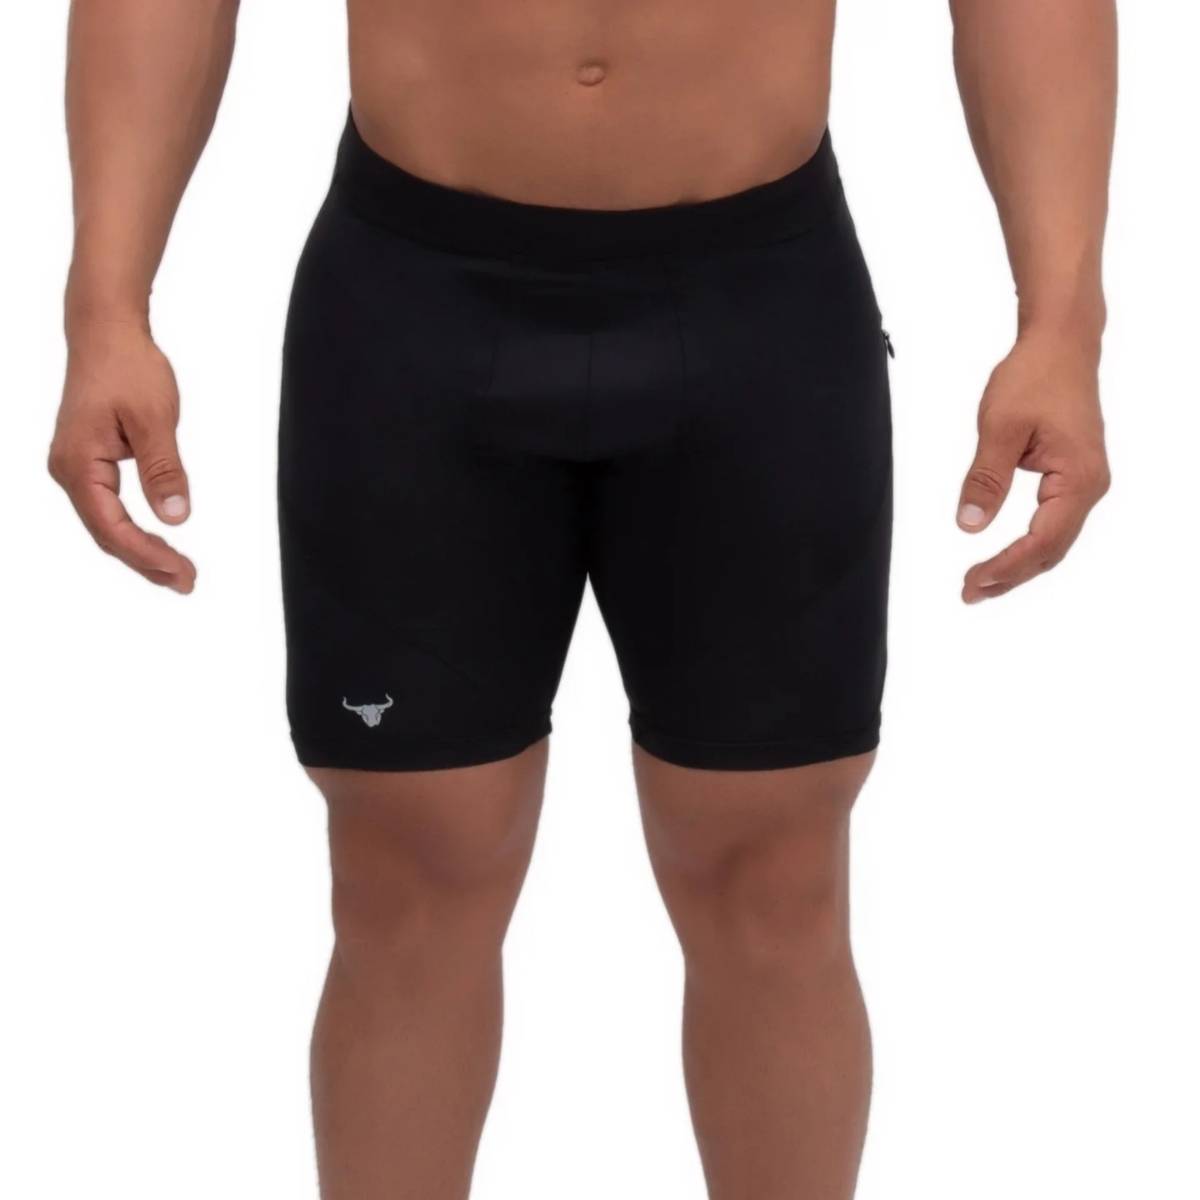 Men's Compression Shorts: The Complete Guide